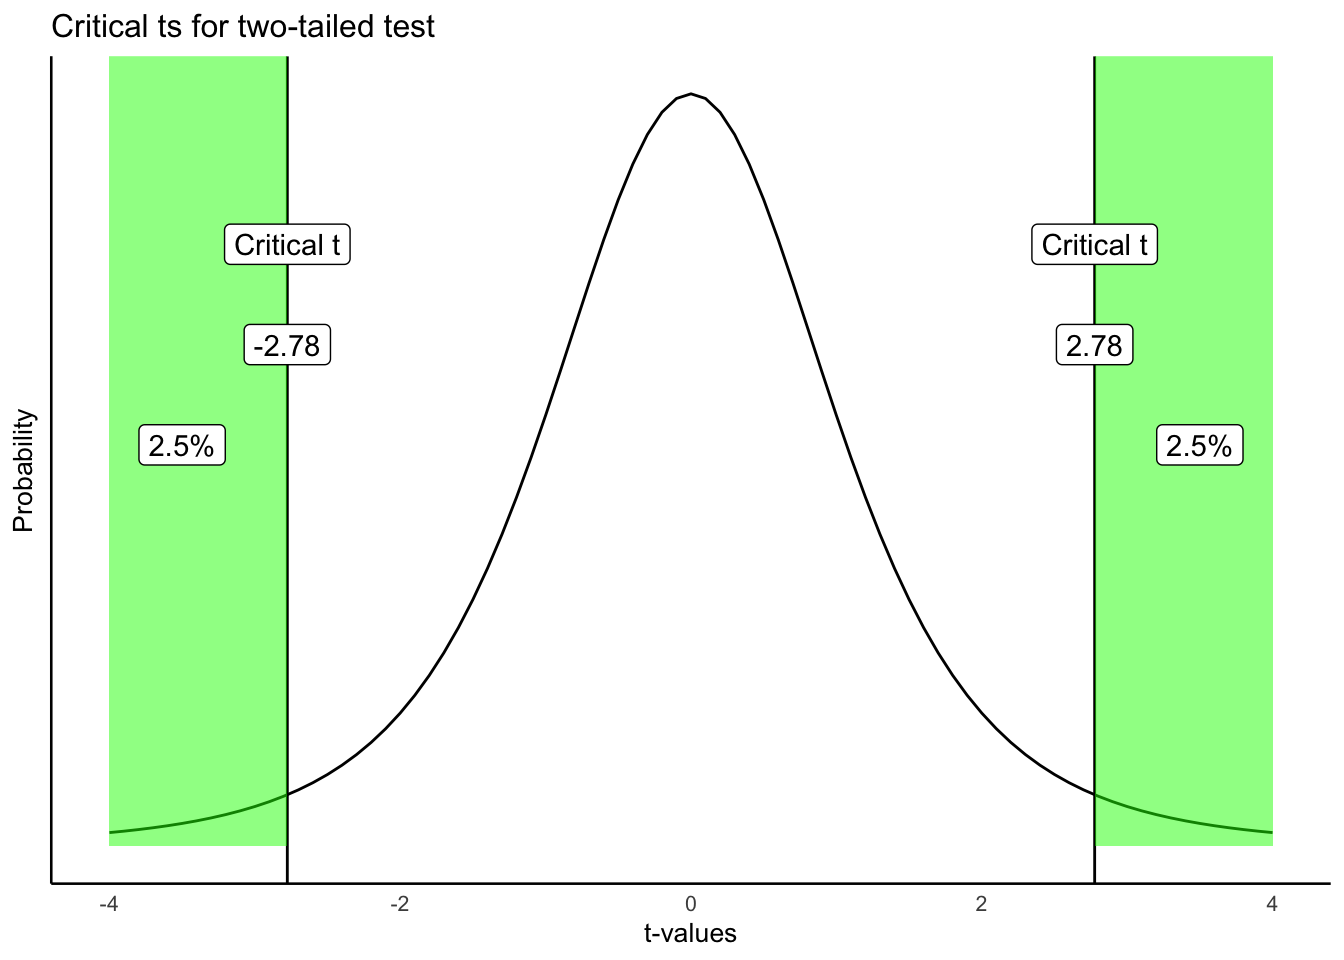 Critical values for a two-tailed test. Each line represents the location where 2.5% of all ts are larger or smaller than critical value. The total for both tails is 5%